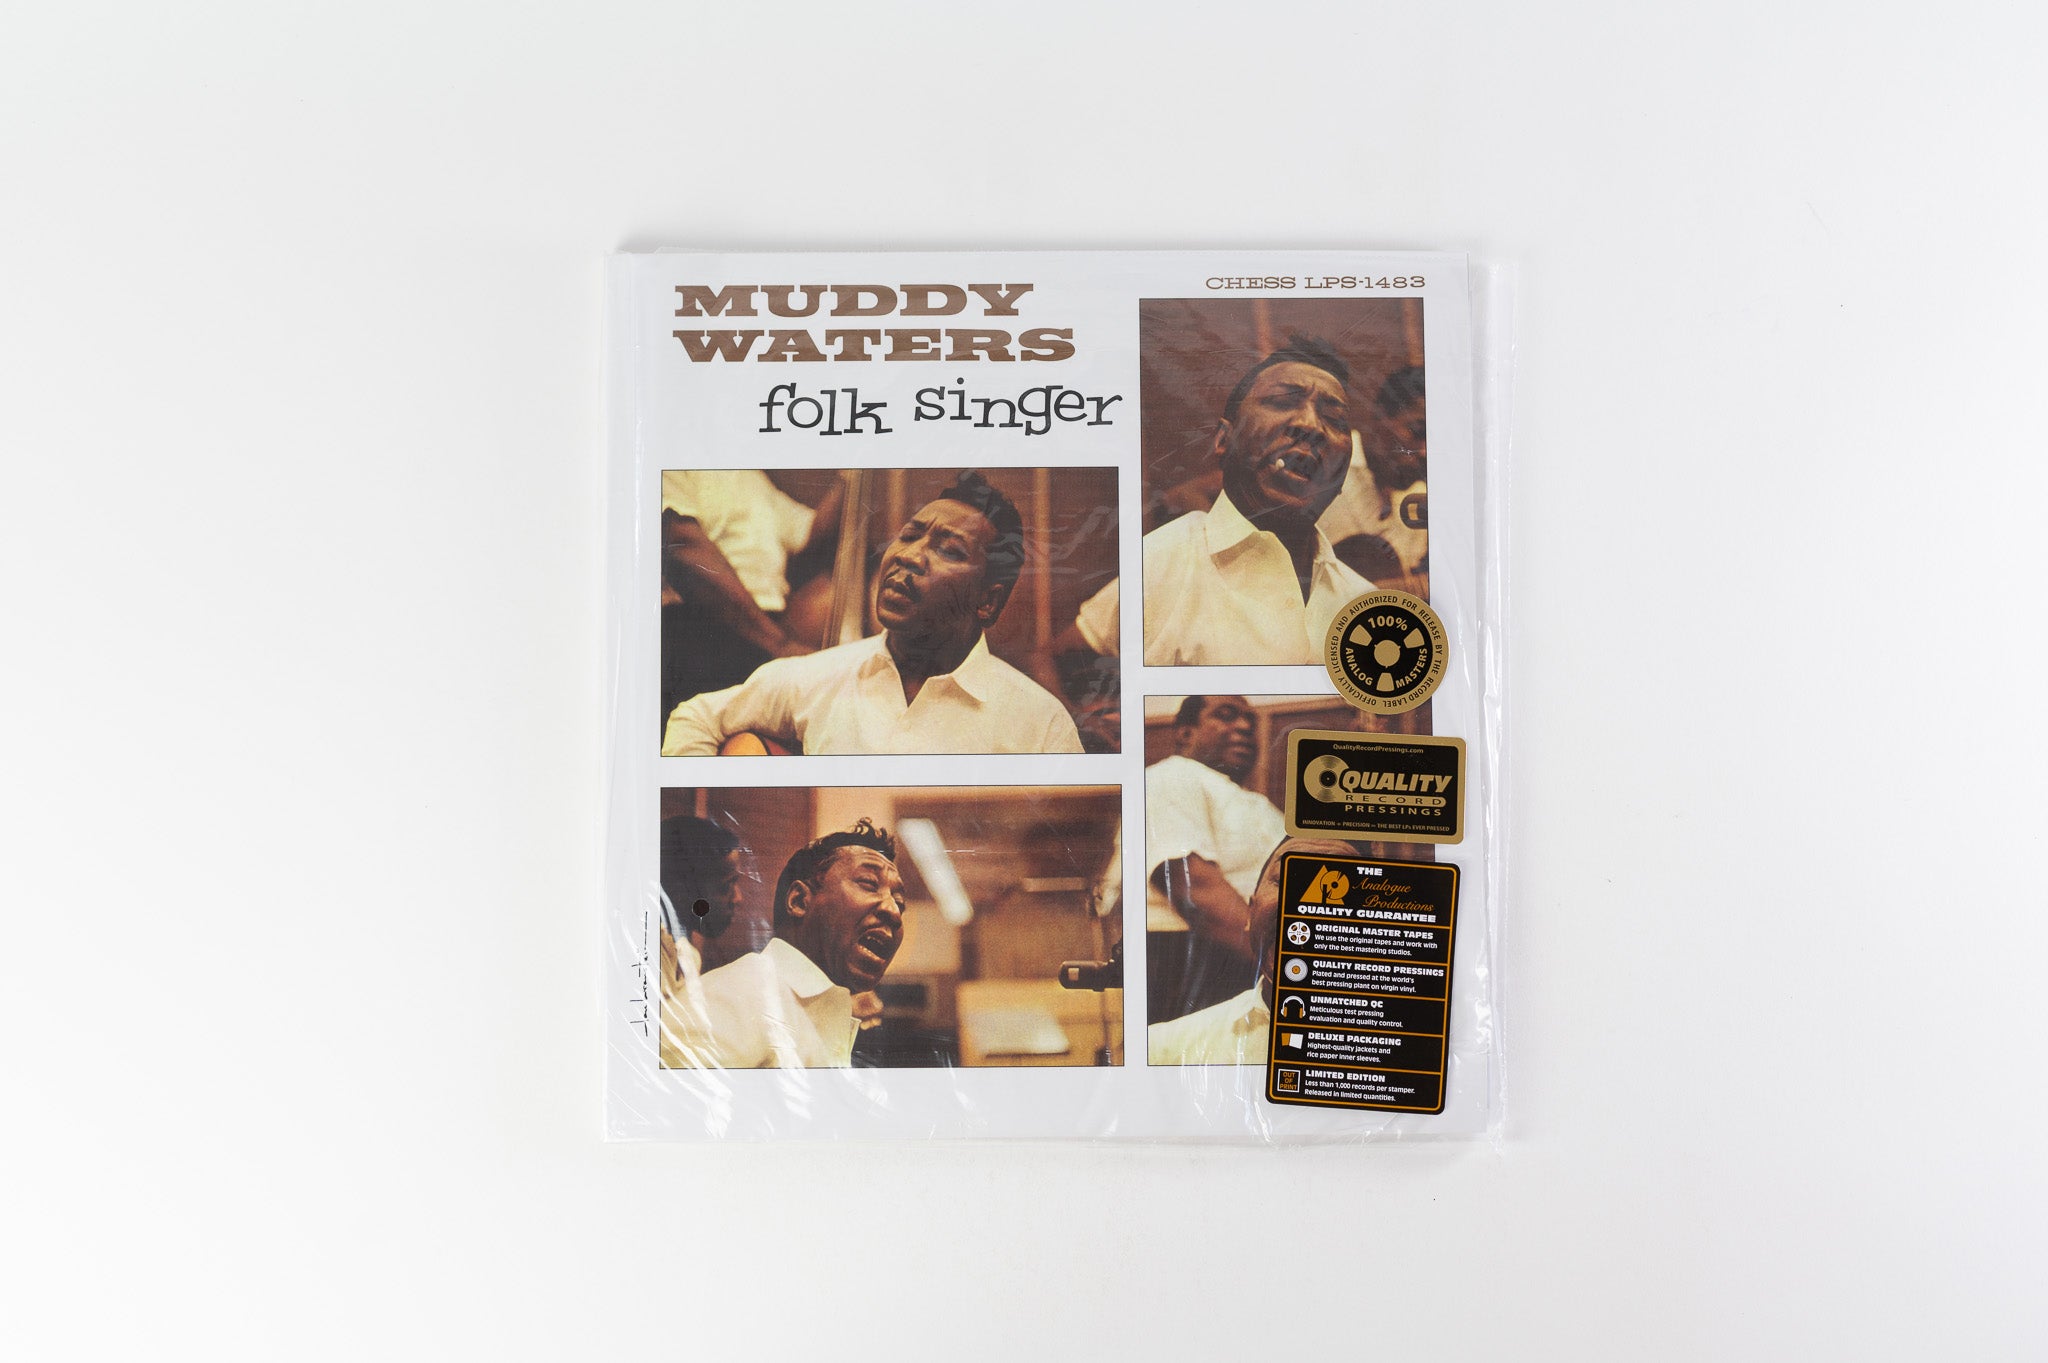 Muddy Waters - Folk Singer Reissue 45 RPM on Analogue Productions